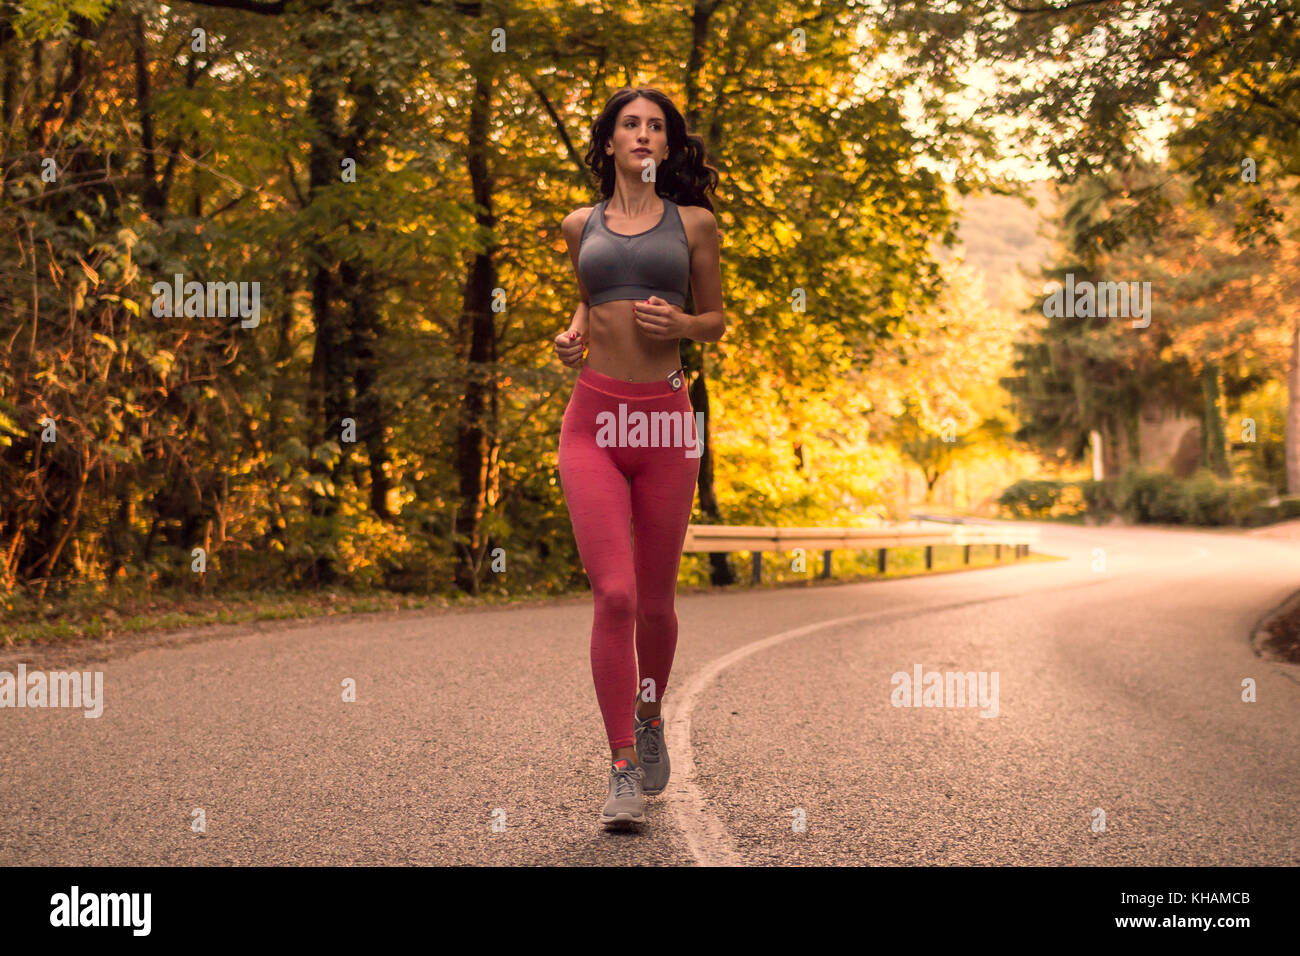 one young adult woman, running jogging, forest woods, asphalt road lane, sunset sunrise daylight, sport clothes Stock Photo